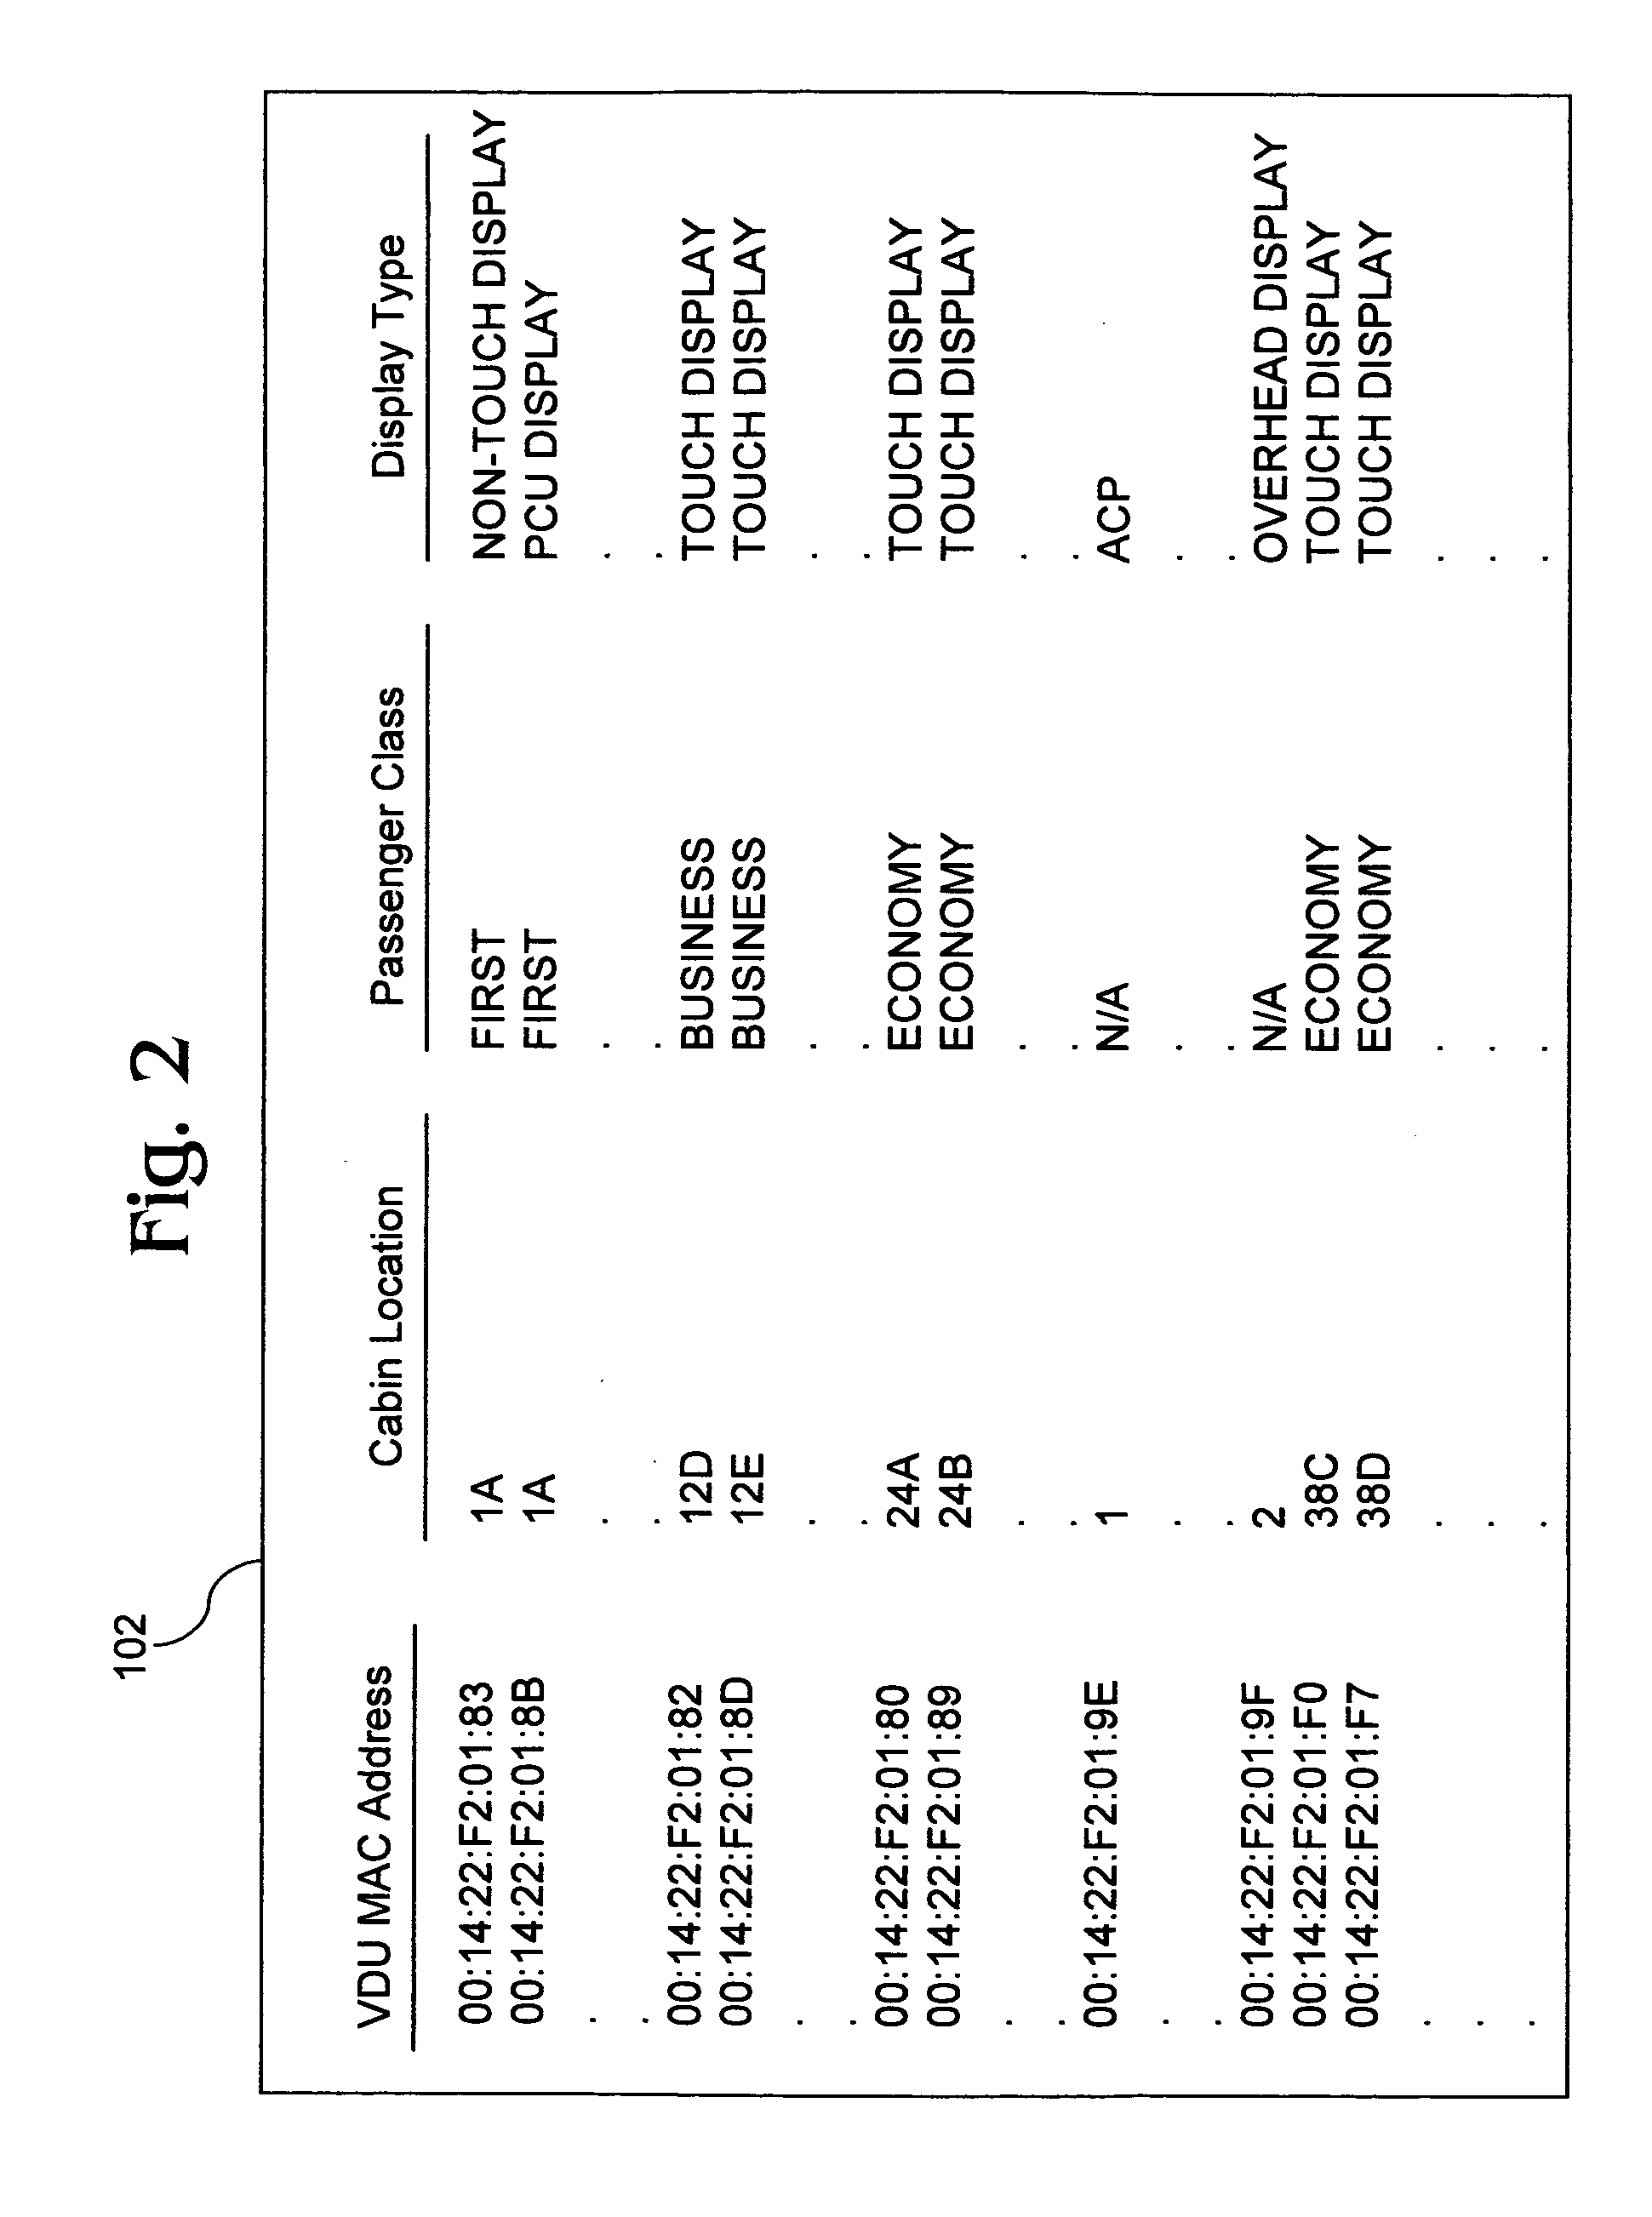 Inflight entertainment system with screen configurable video display unit roles